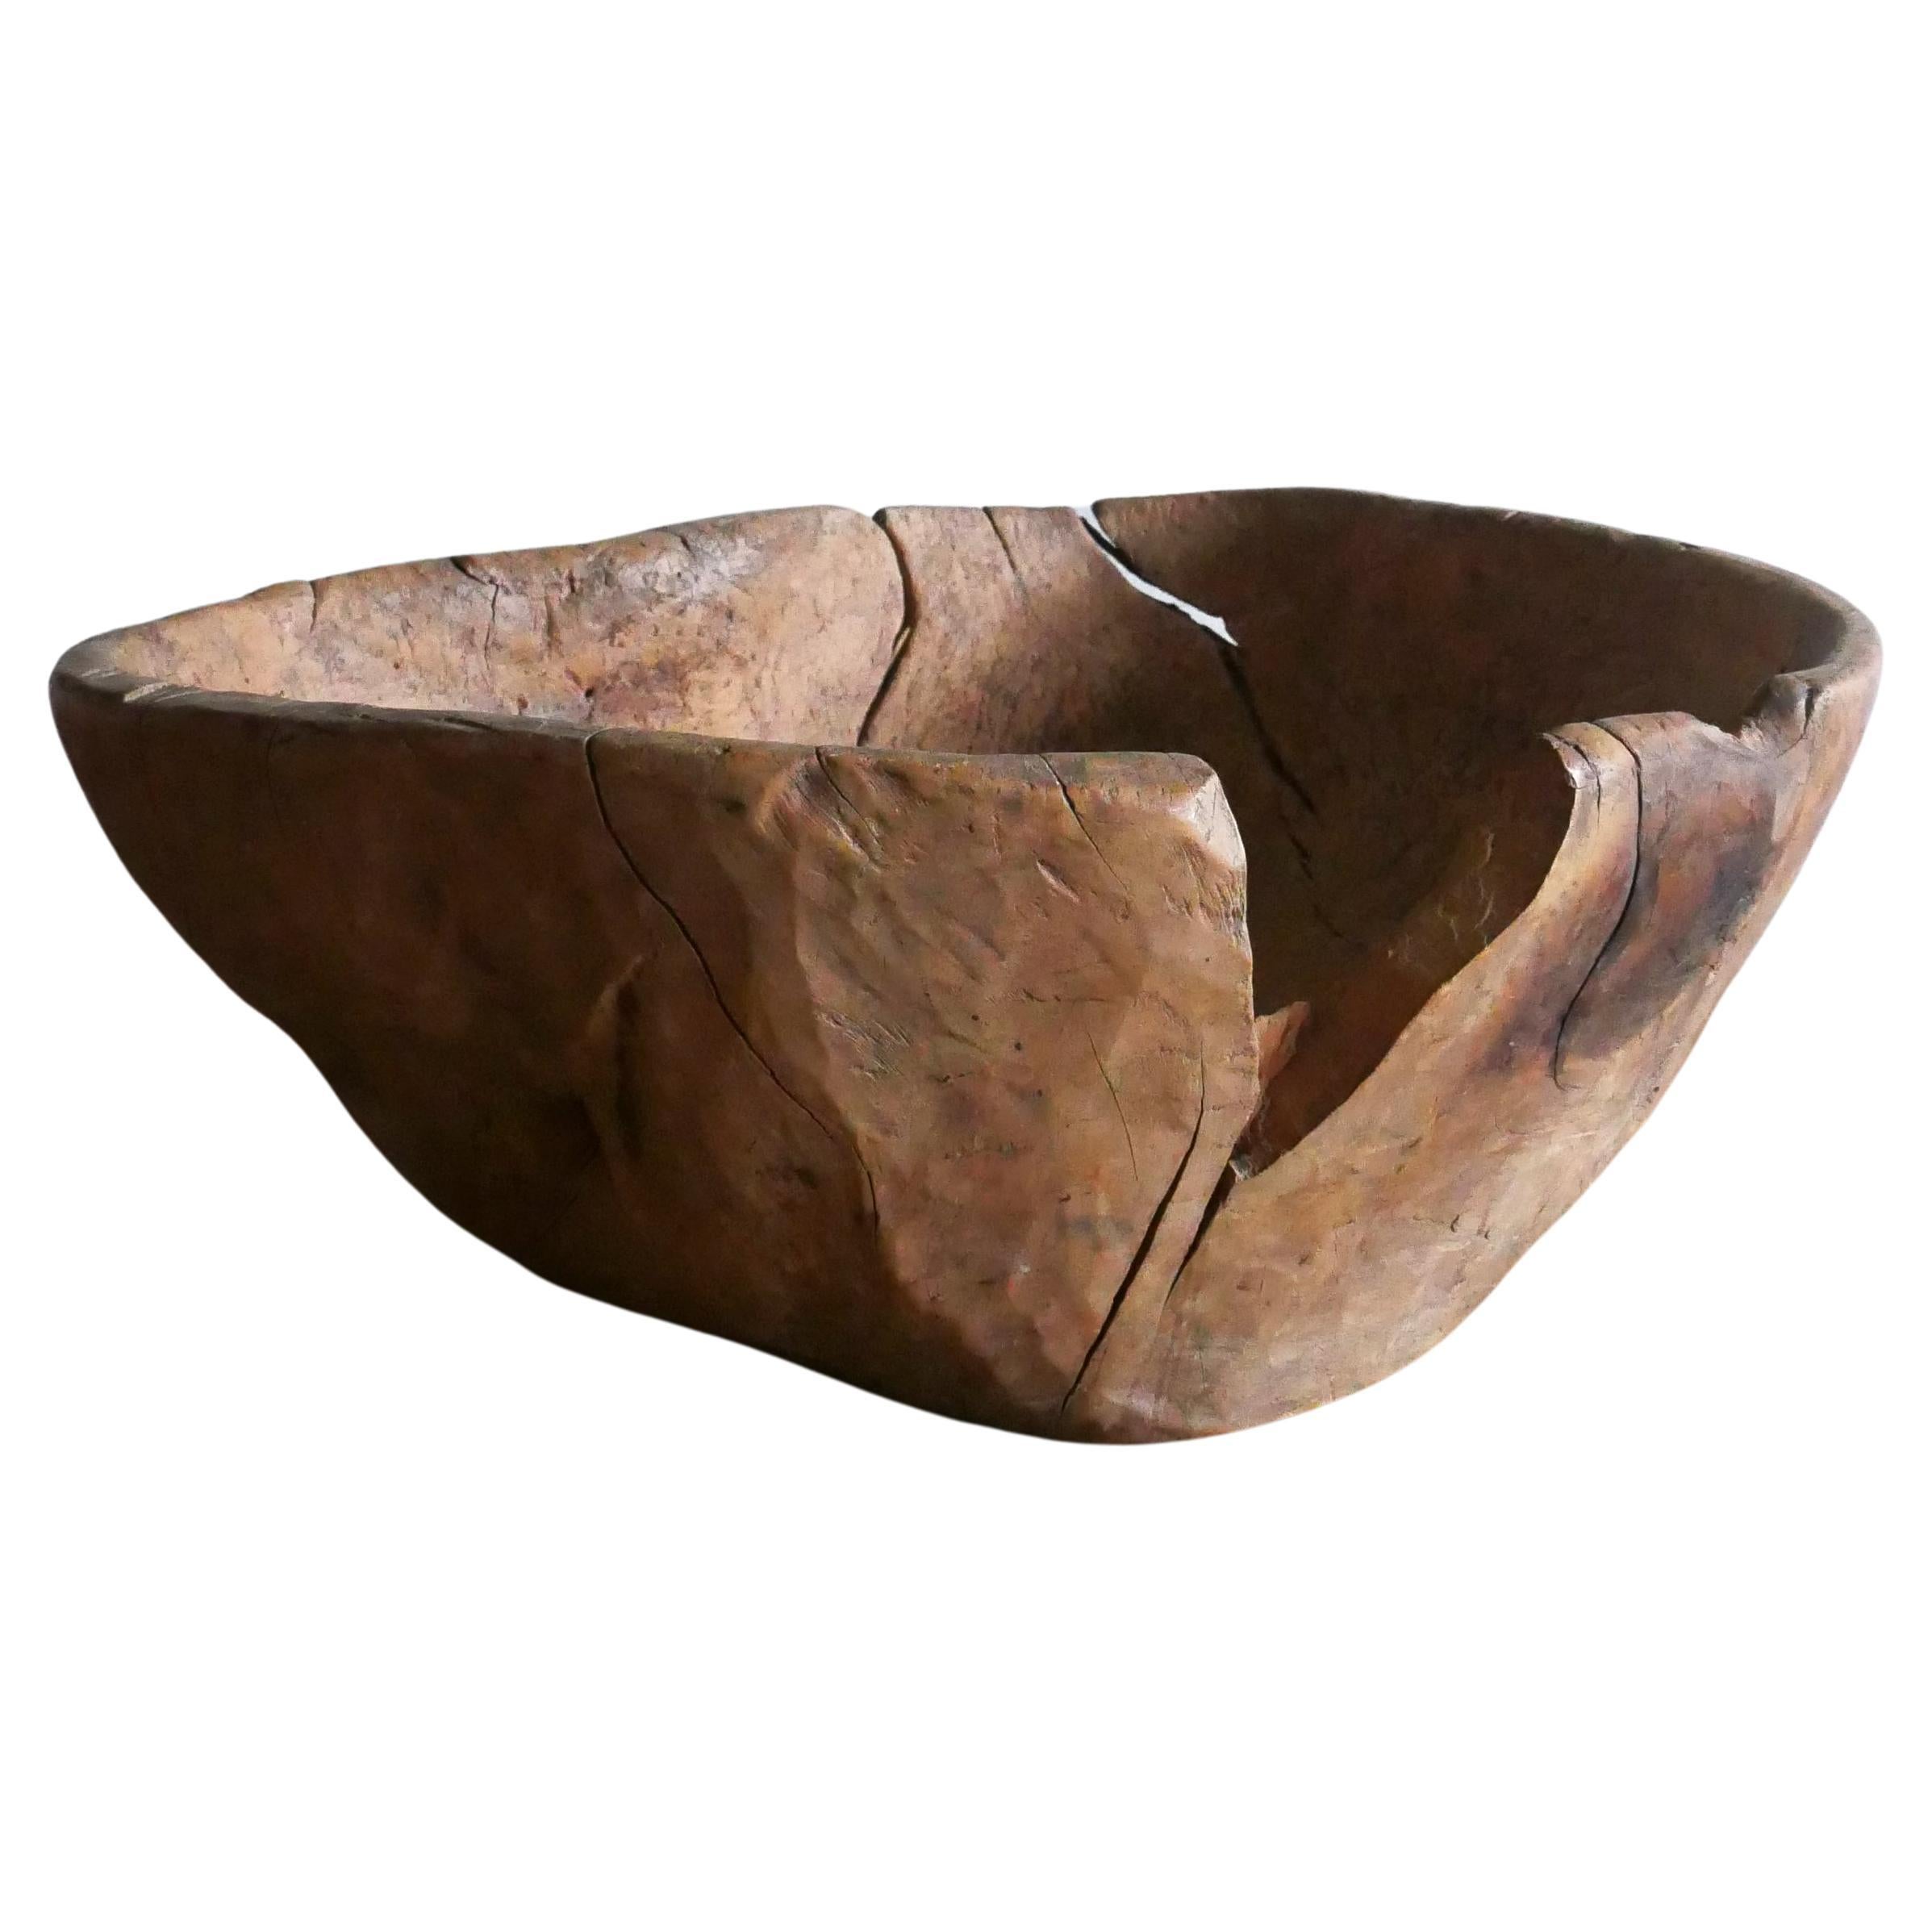 Really big primitive wooden bowl from Sweden, made in 1832 .

It’s heavy patinated over the years and it has a lovely patina, maker marks on the bottom and date. 
